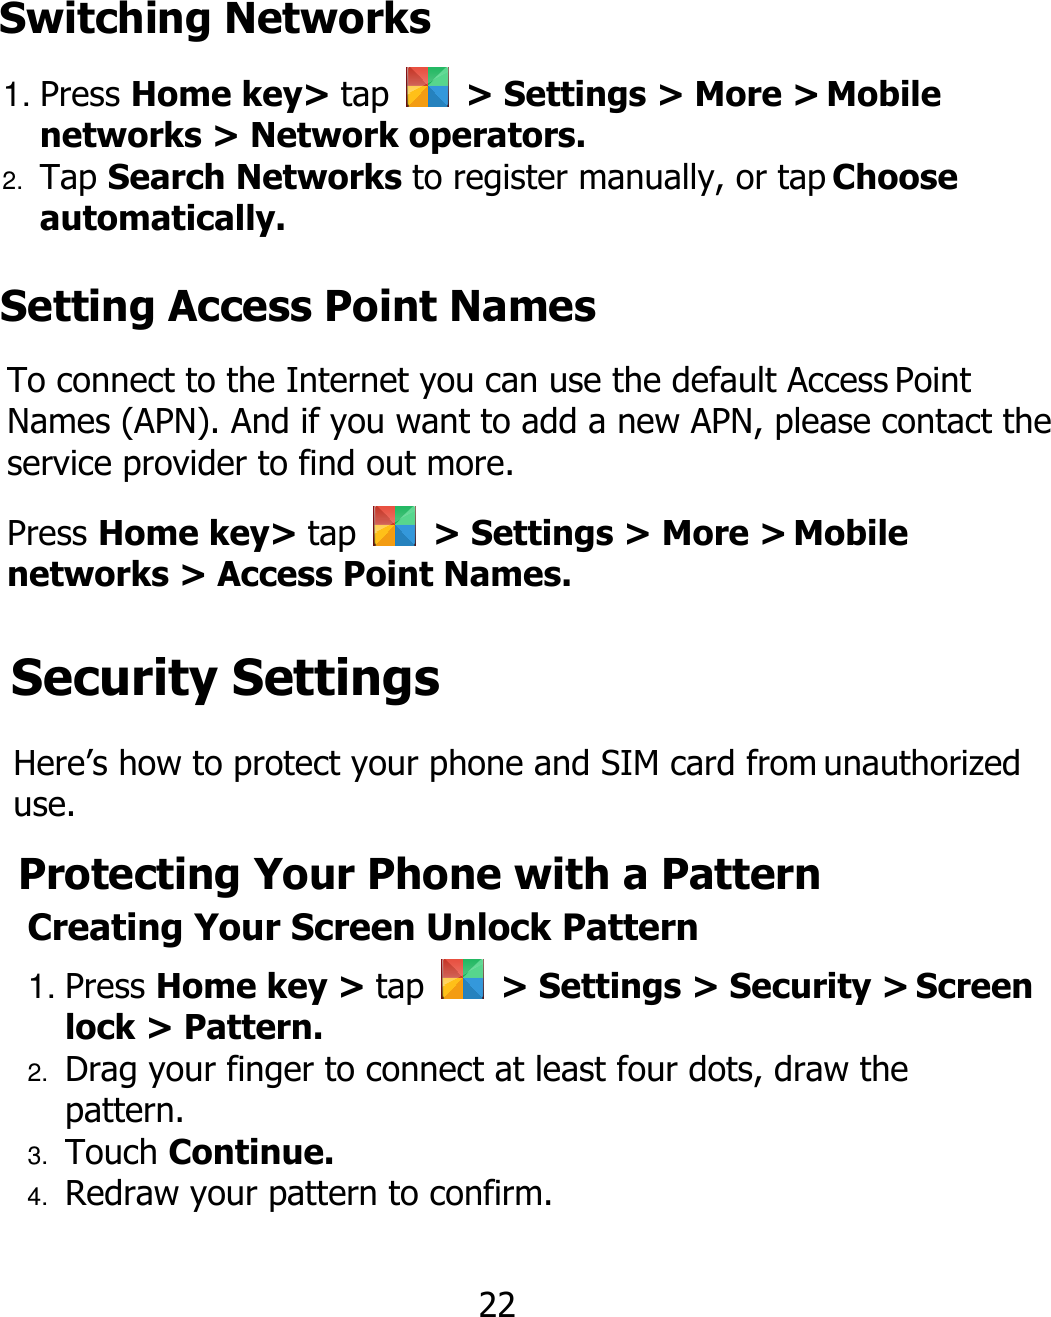 1. Press Home key&gt; tap    &gt; Settings &gt; More &gt; Mobile networks &gt; Network operators. 2. Tap Search Networks to register manually, or tap Choose automatically. 22 Switching Networks Setting Access Point Names To connect to the Internet you can use the default Access Point Names (APN). And if you want to add a new APN, please contact the service provider to find out more. Press Home key&gt; tap    &gt; Settings &gt; More &gt; Mobile networks &gt; Access Point Names. Security Settings Here’s how to protect your phone and SIM card from unauthorized use. Protecting Your Phone with a Pattern Creating Your Screen Unlock Pattern 1. Press Home key &gt; tap    &gt; Settings &gt; Security &gt; Screen lock &gt; Pattern. 2. Drag your finger to connect at least four dots, draw the pattern. 3. Touch Continue. 4. Redraw your pattern to confirm. 